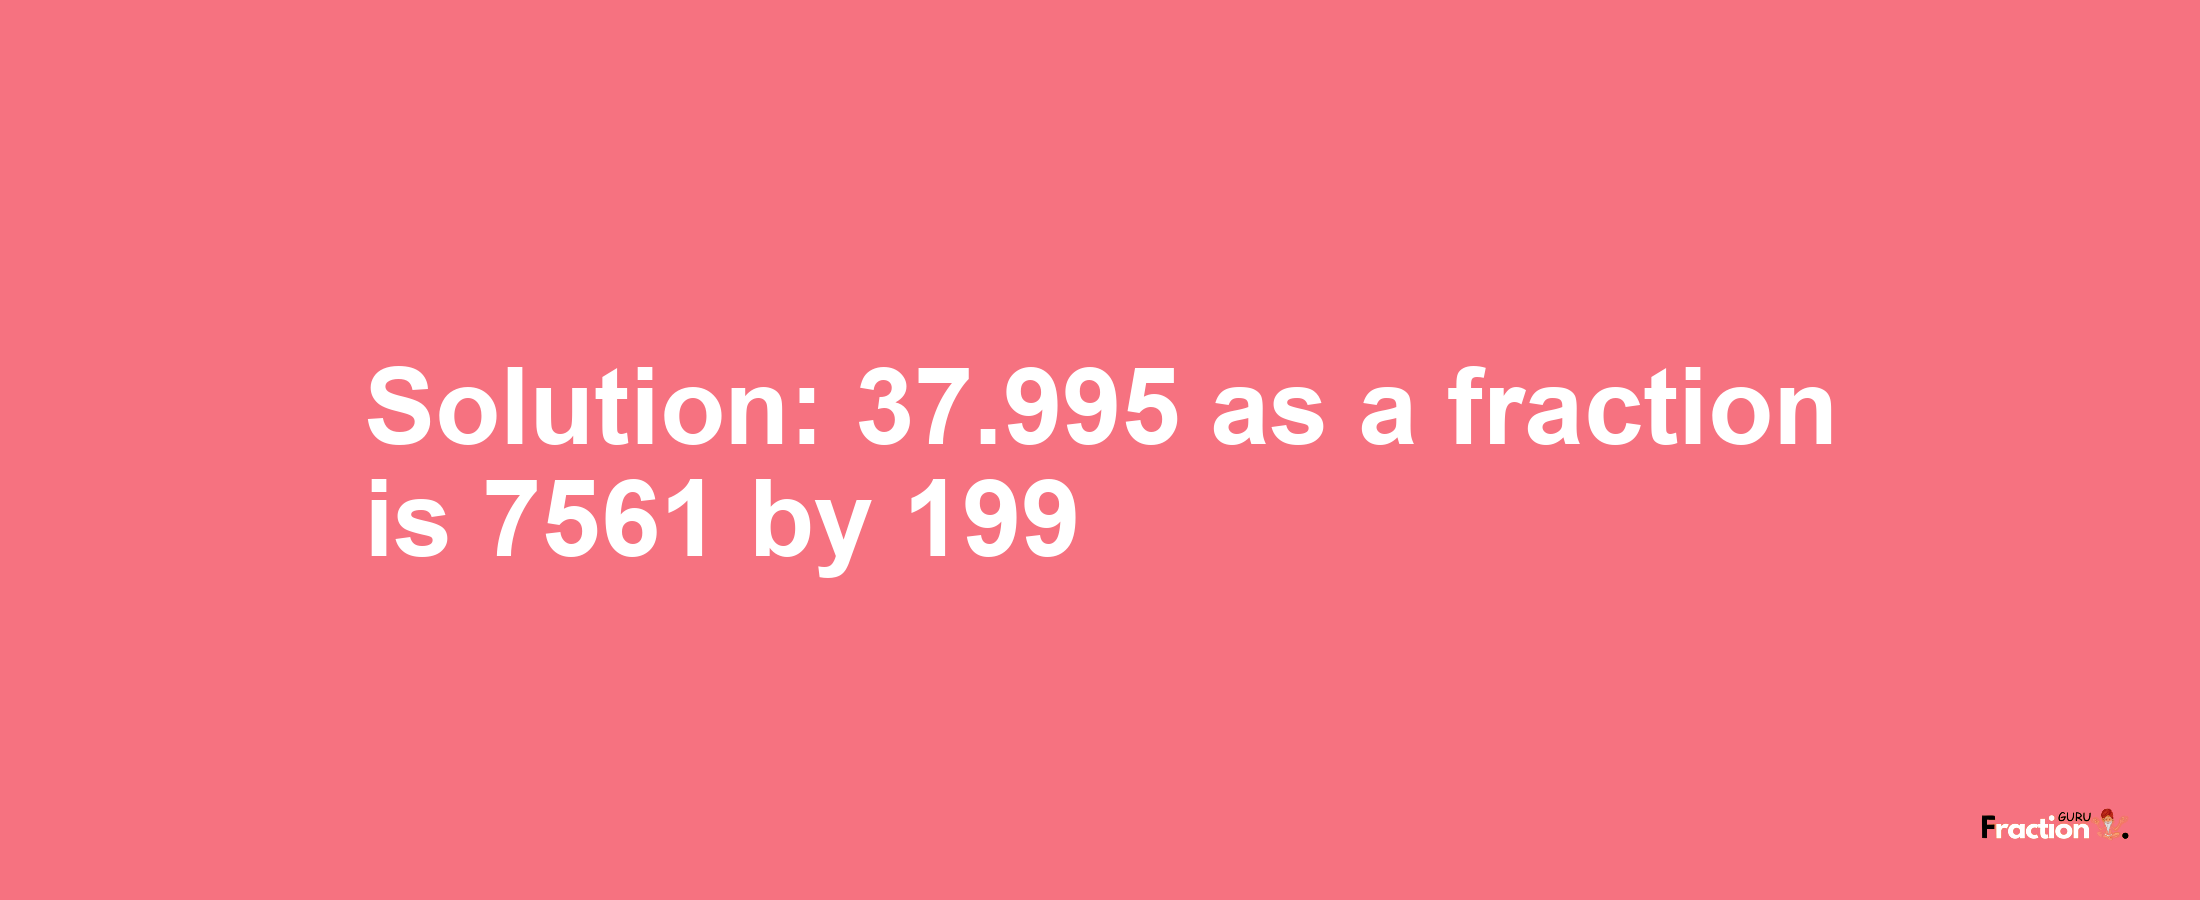 Solution:37.995 as a fraction is 7561/199